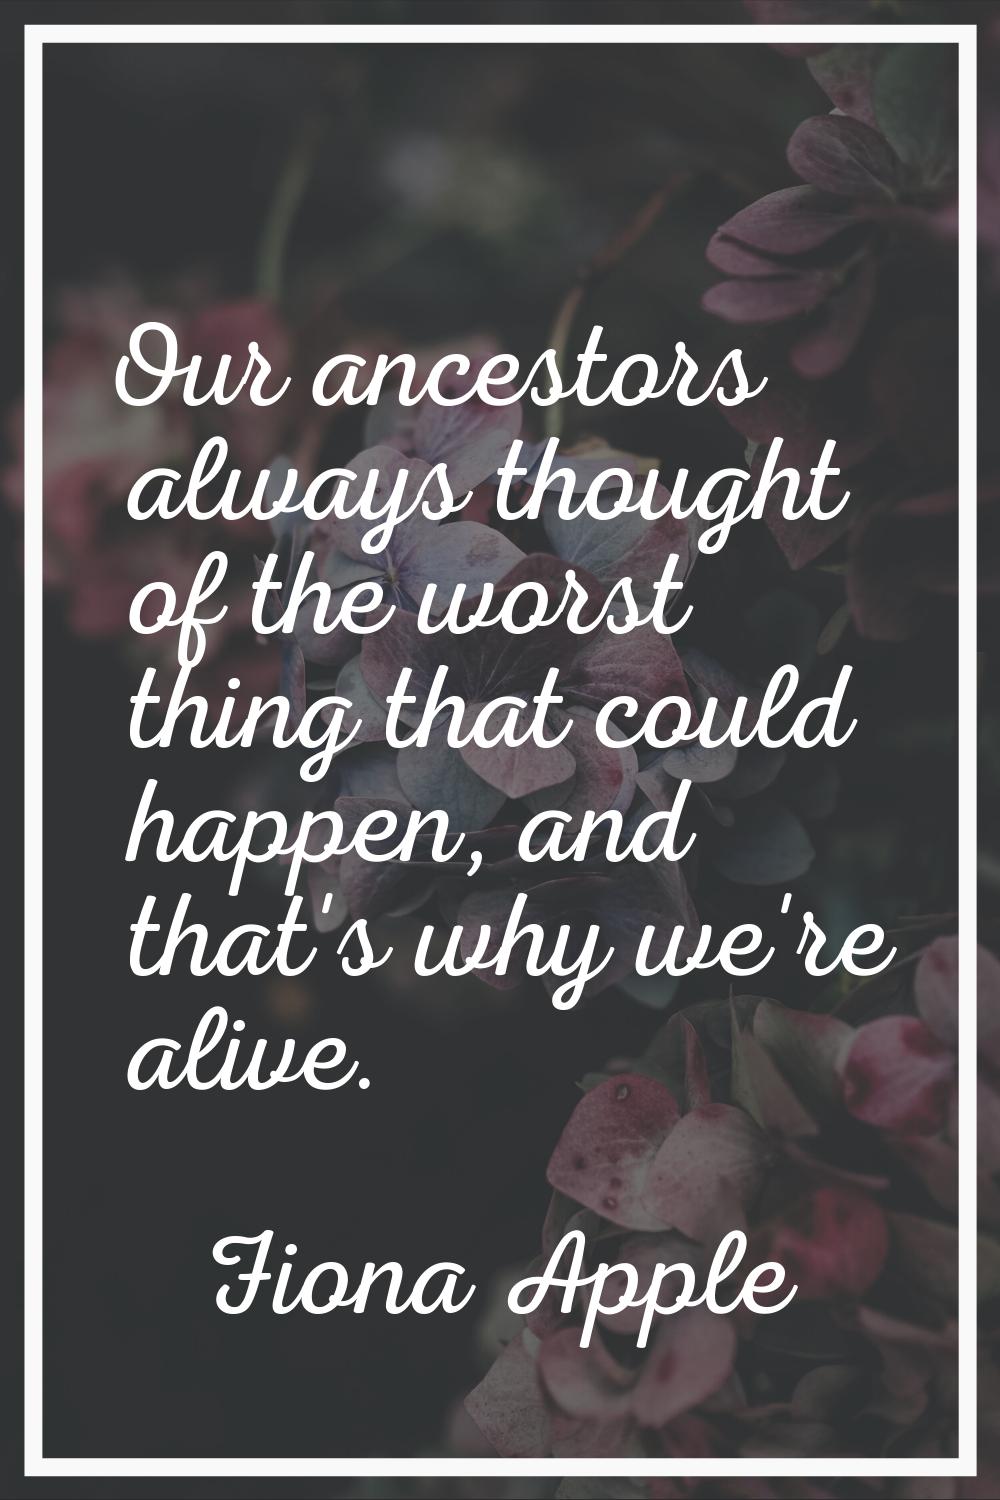 Our ancestors always thought of the worst thing that could happen, and that's why we're alive.